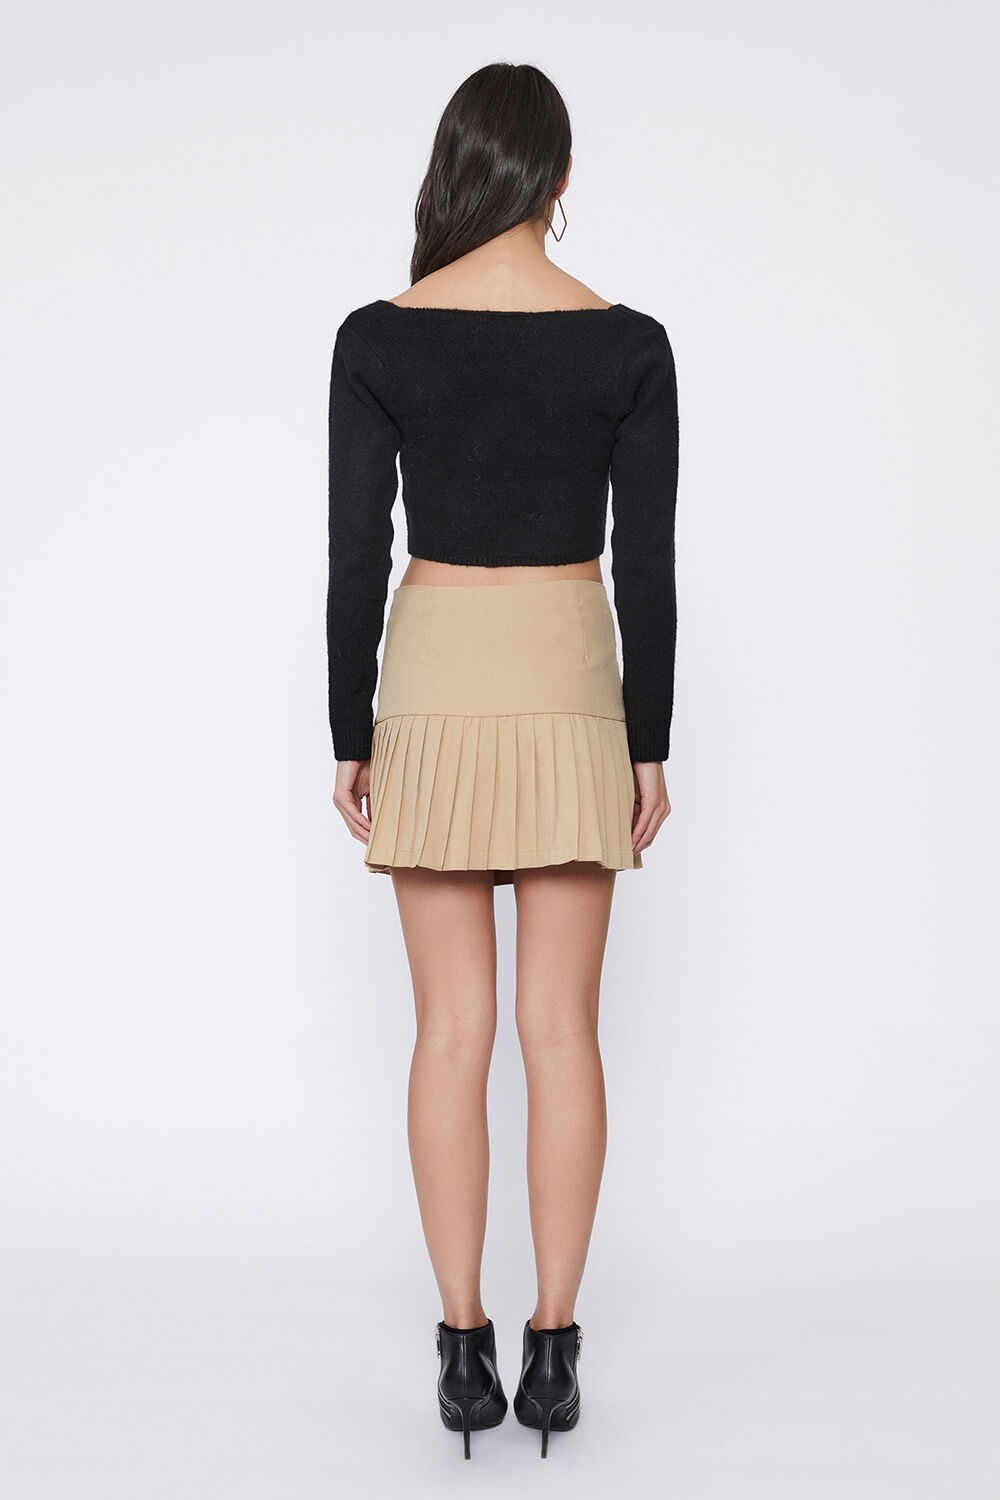 BELLA PLEATED SKIRT in colour TAN